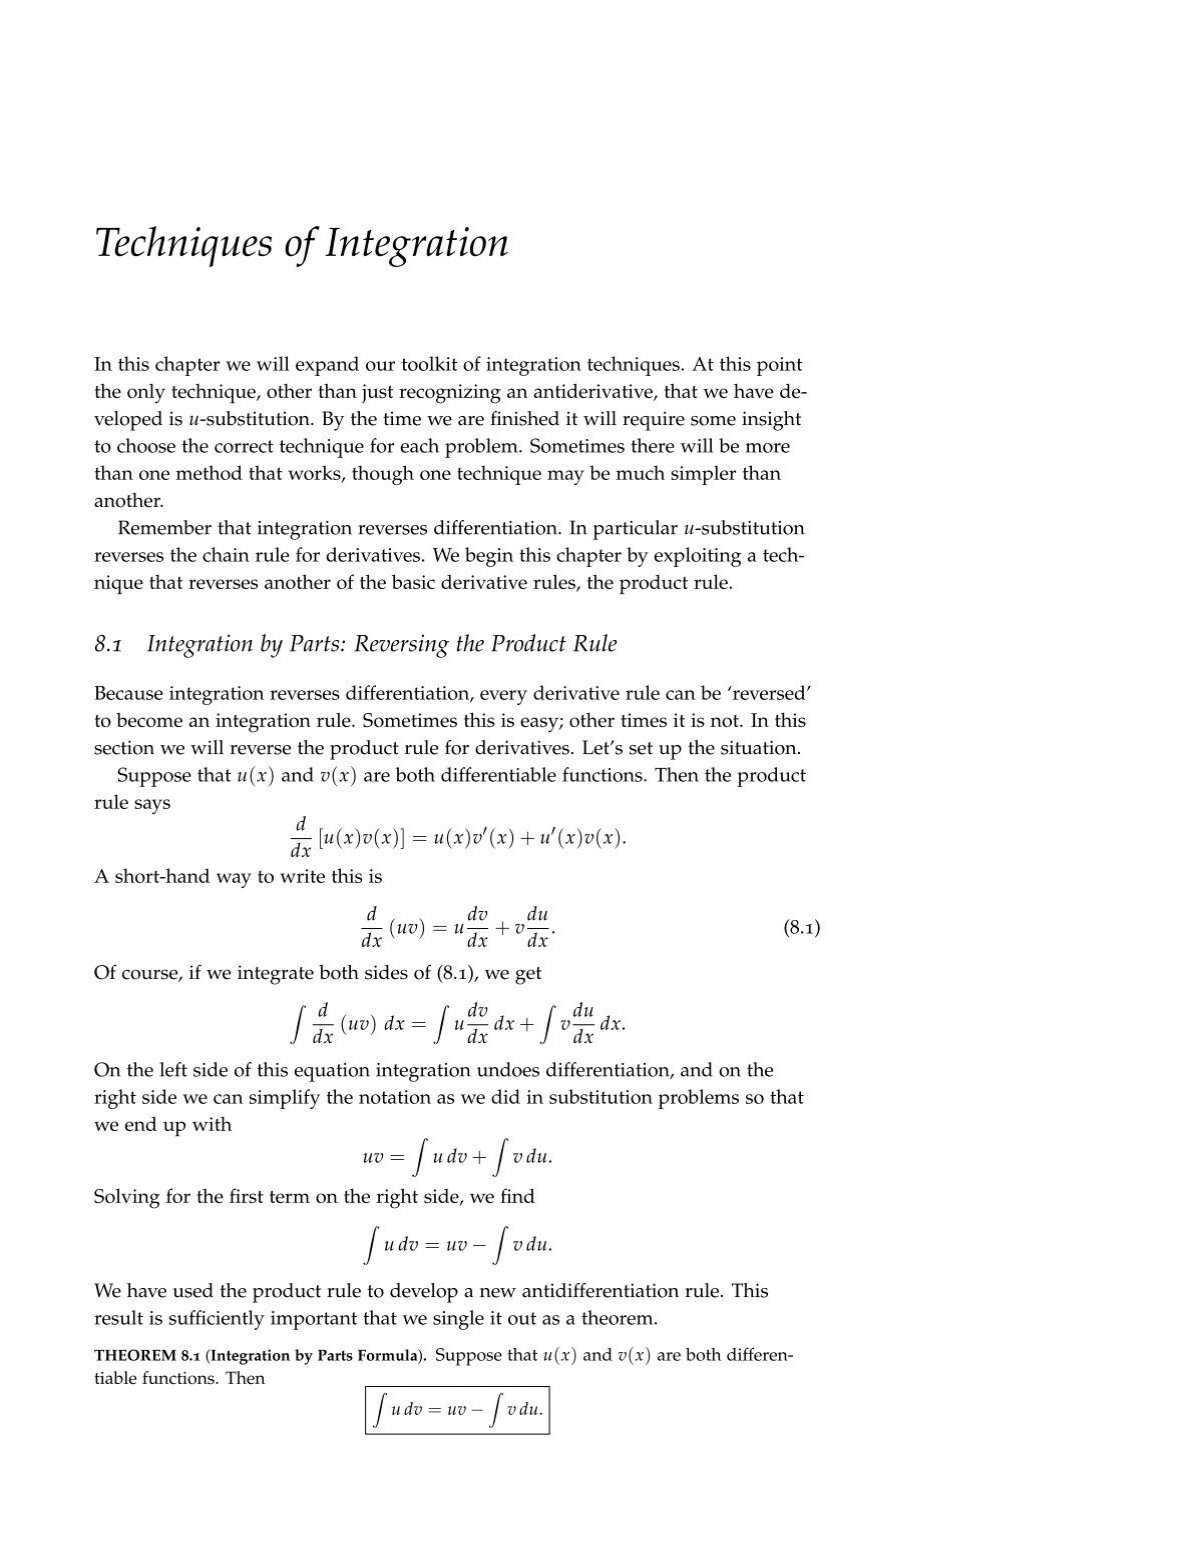 Basic Integral Rules. Remember there're a bunch of…